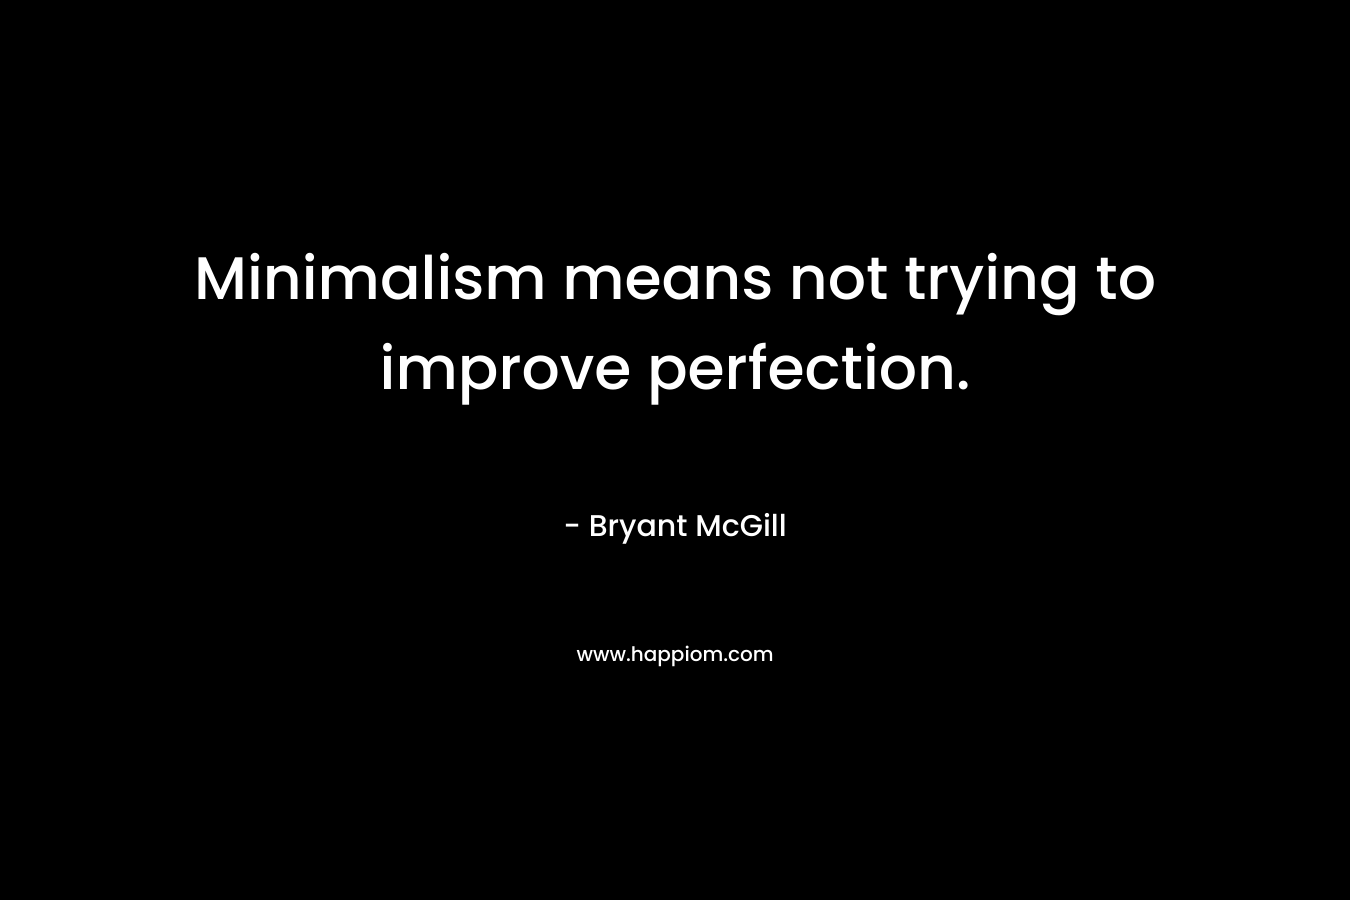 Minimalism means not trying to improve perfection. – Bryant McGill